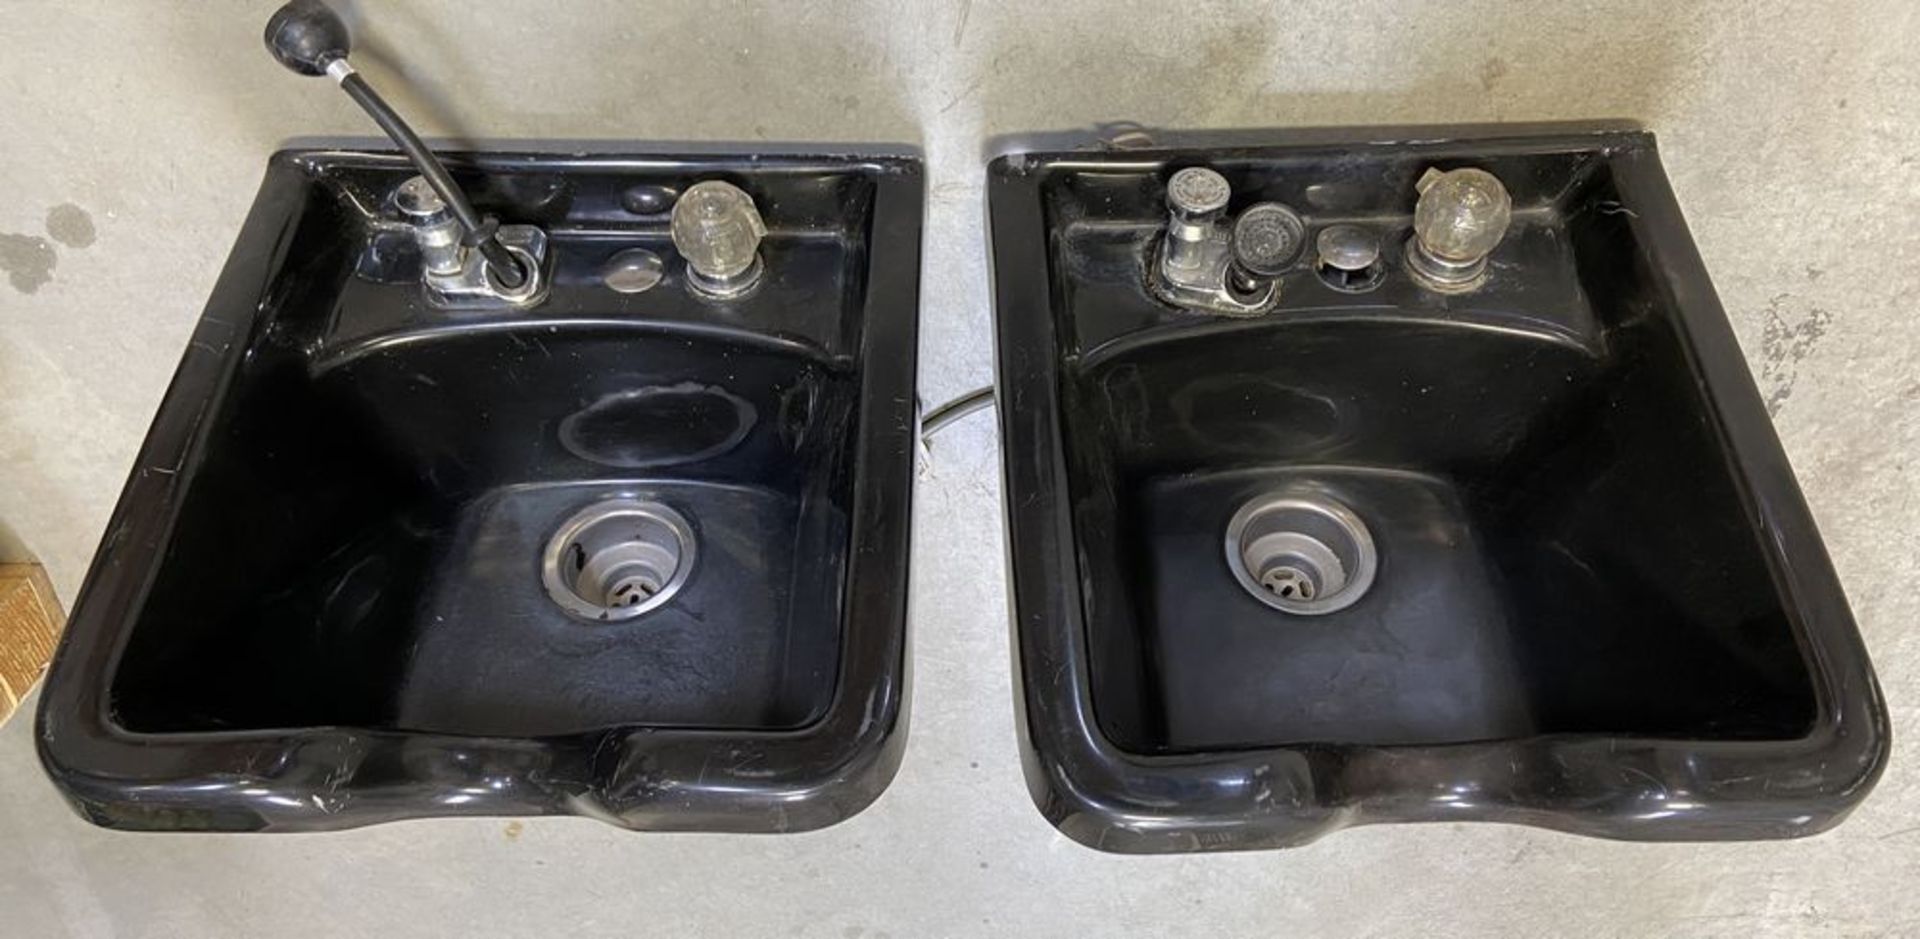 2x Professional Salon Hair Washing Sinks with Hoses and Plumbing Parts - Bild 2 aus 11